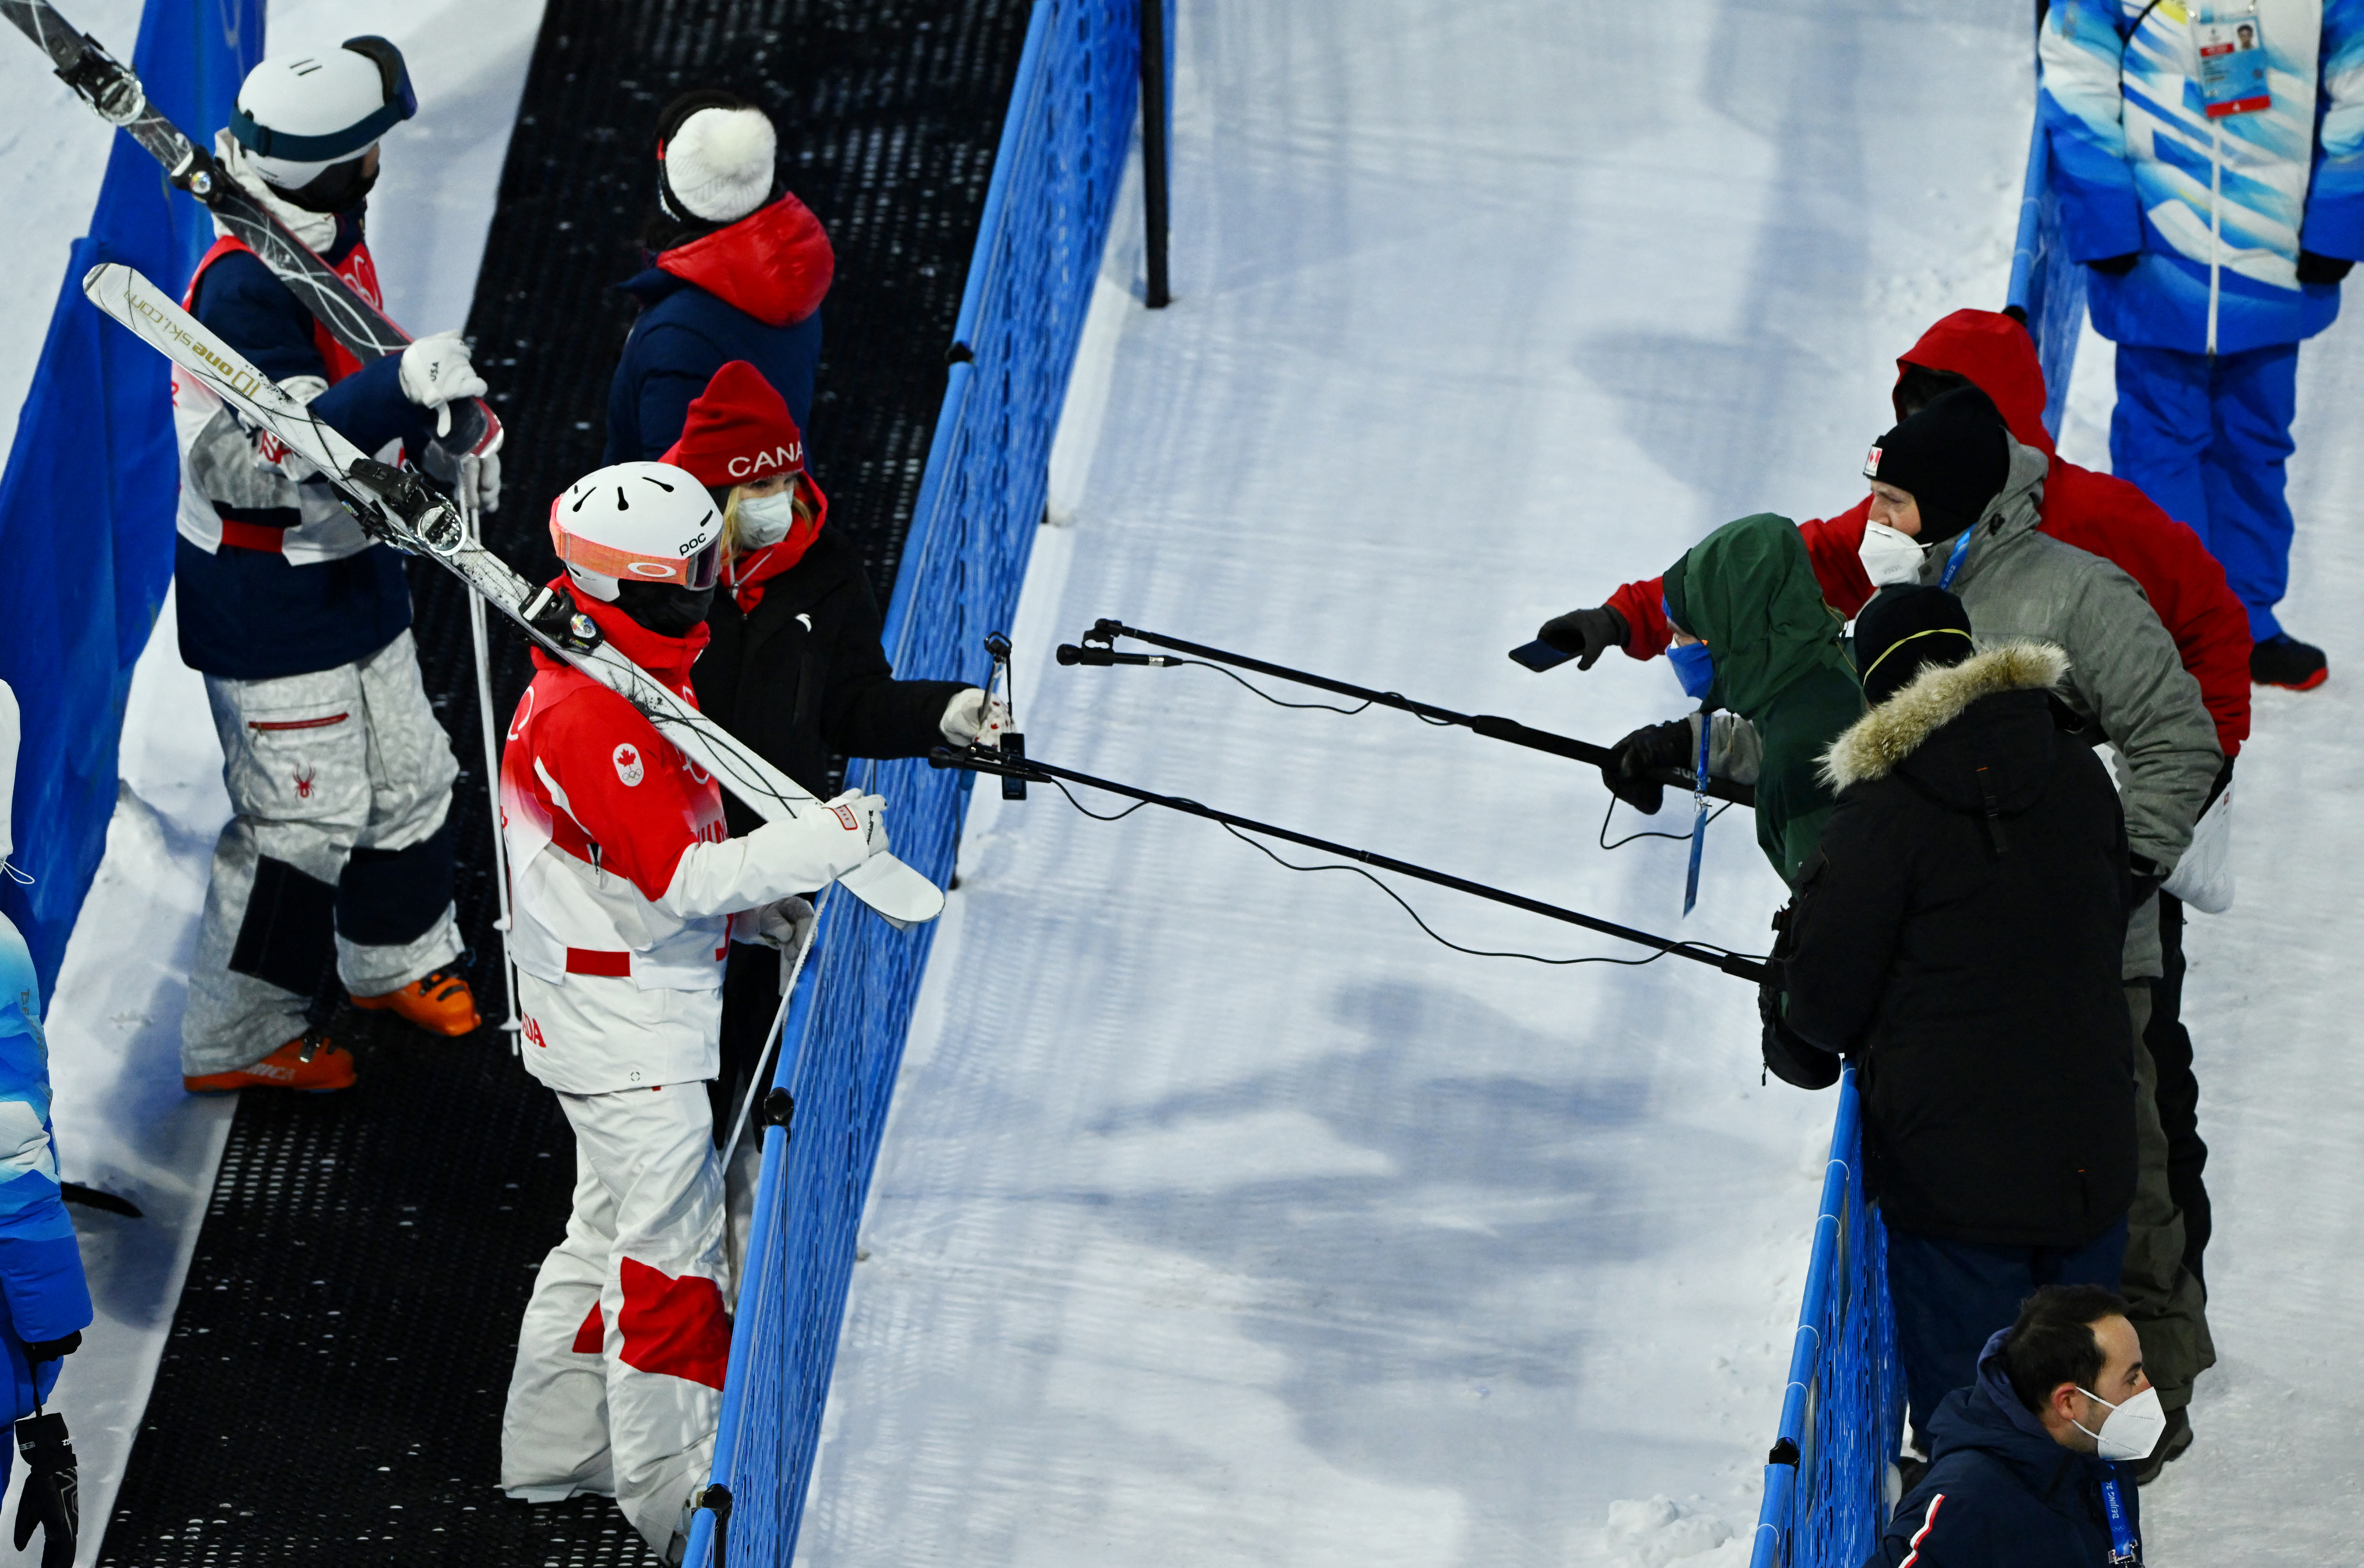 2022 Beijing Olympics - Freestyle Skiing - Men's Moguls - Qualification 2 - Genting Snow Park, Zhangjiakou, China - February 5, 2022.  Members of the media observe social distancing as they conduct an interview with Laurent Dumais of Canada. REUTERS/Dylan Martinez